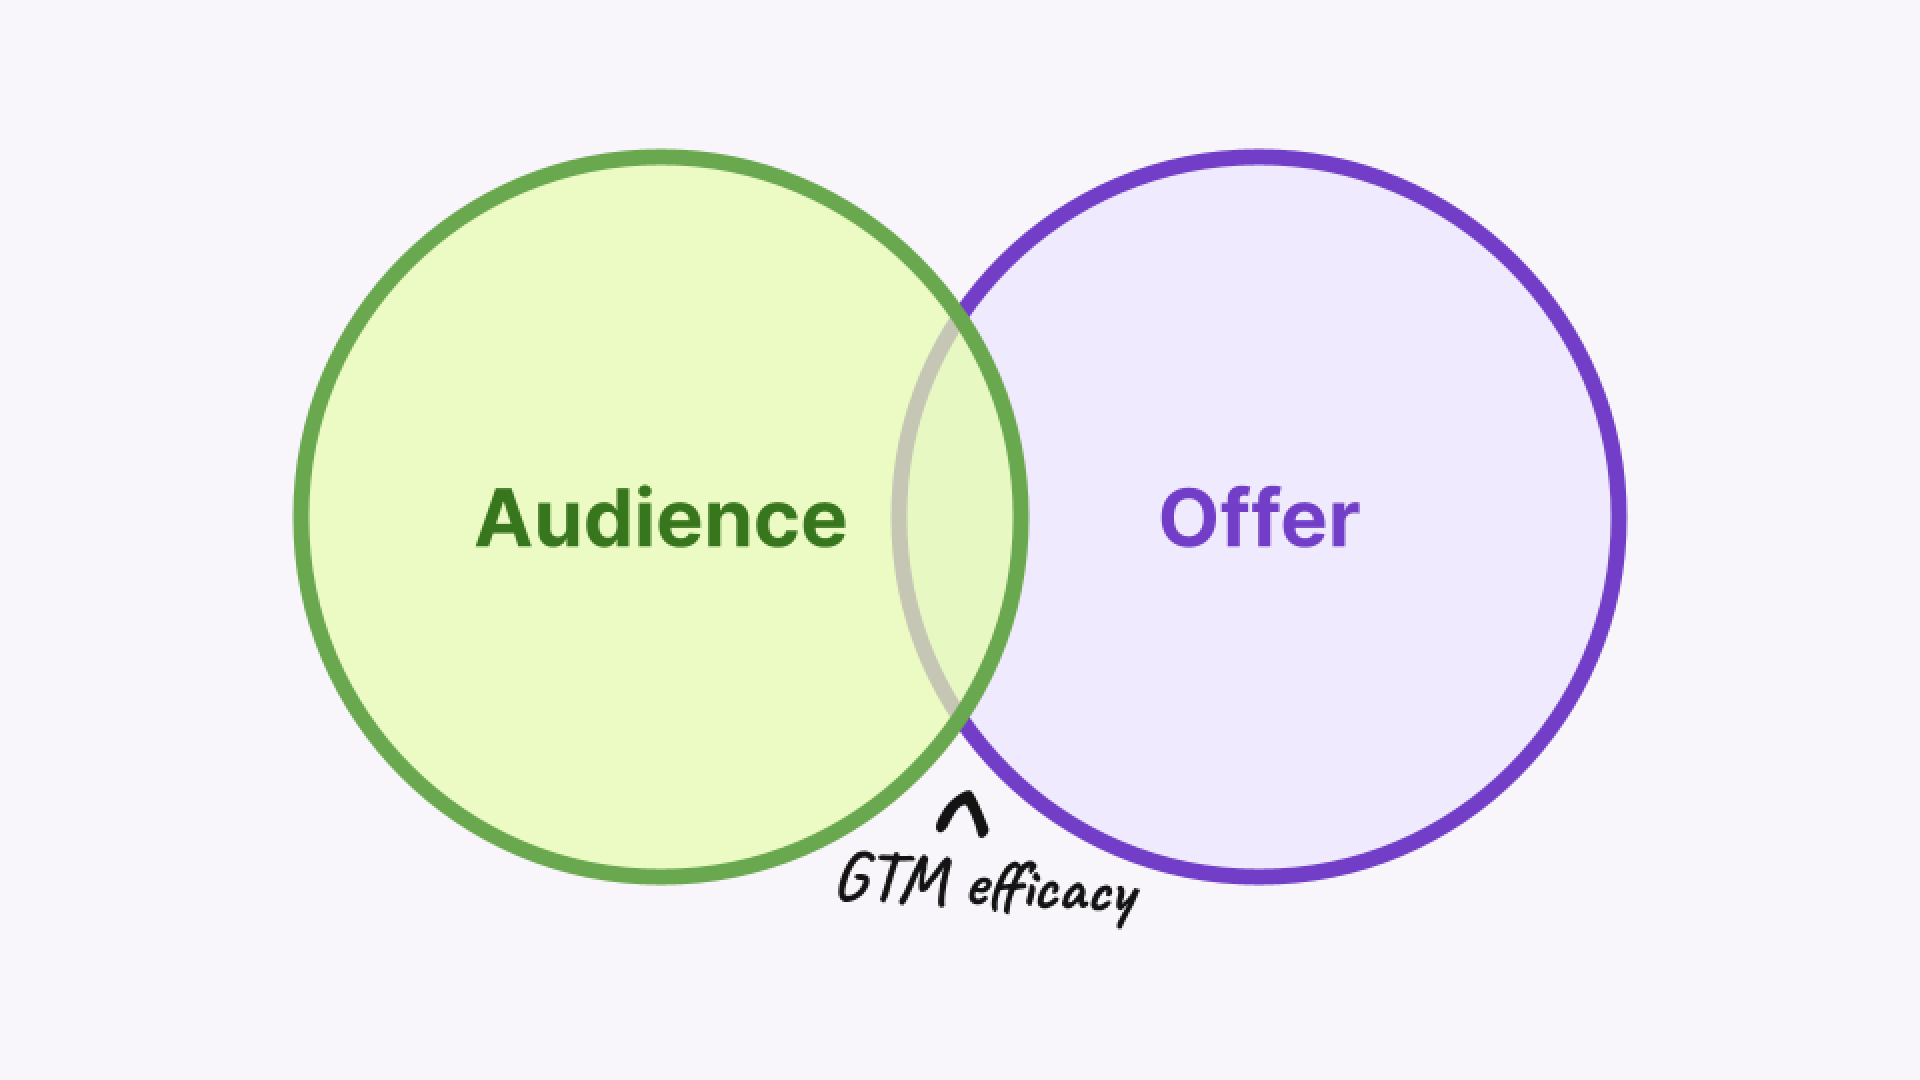 Image of the overlap between audience and offer